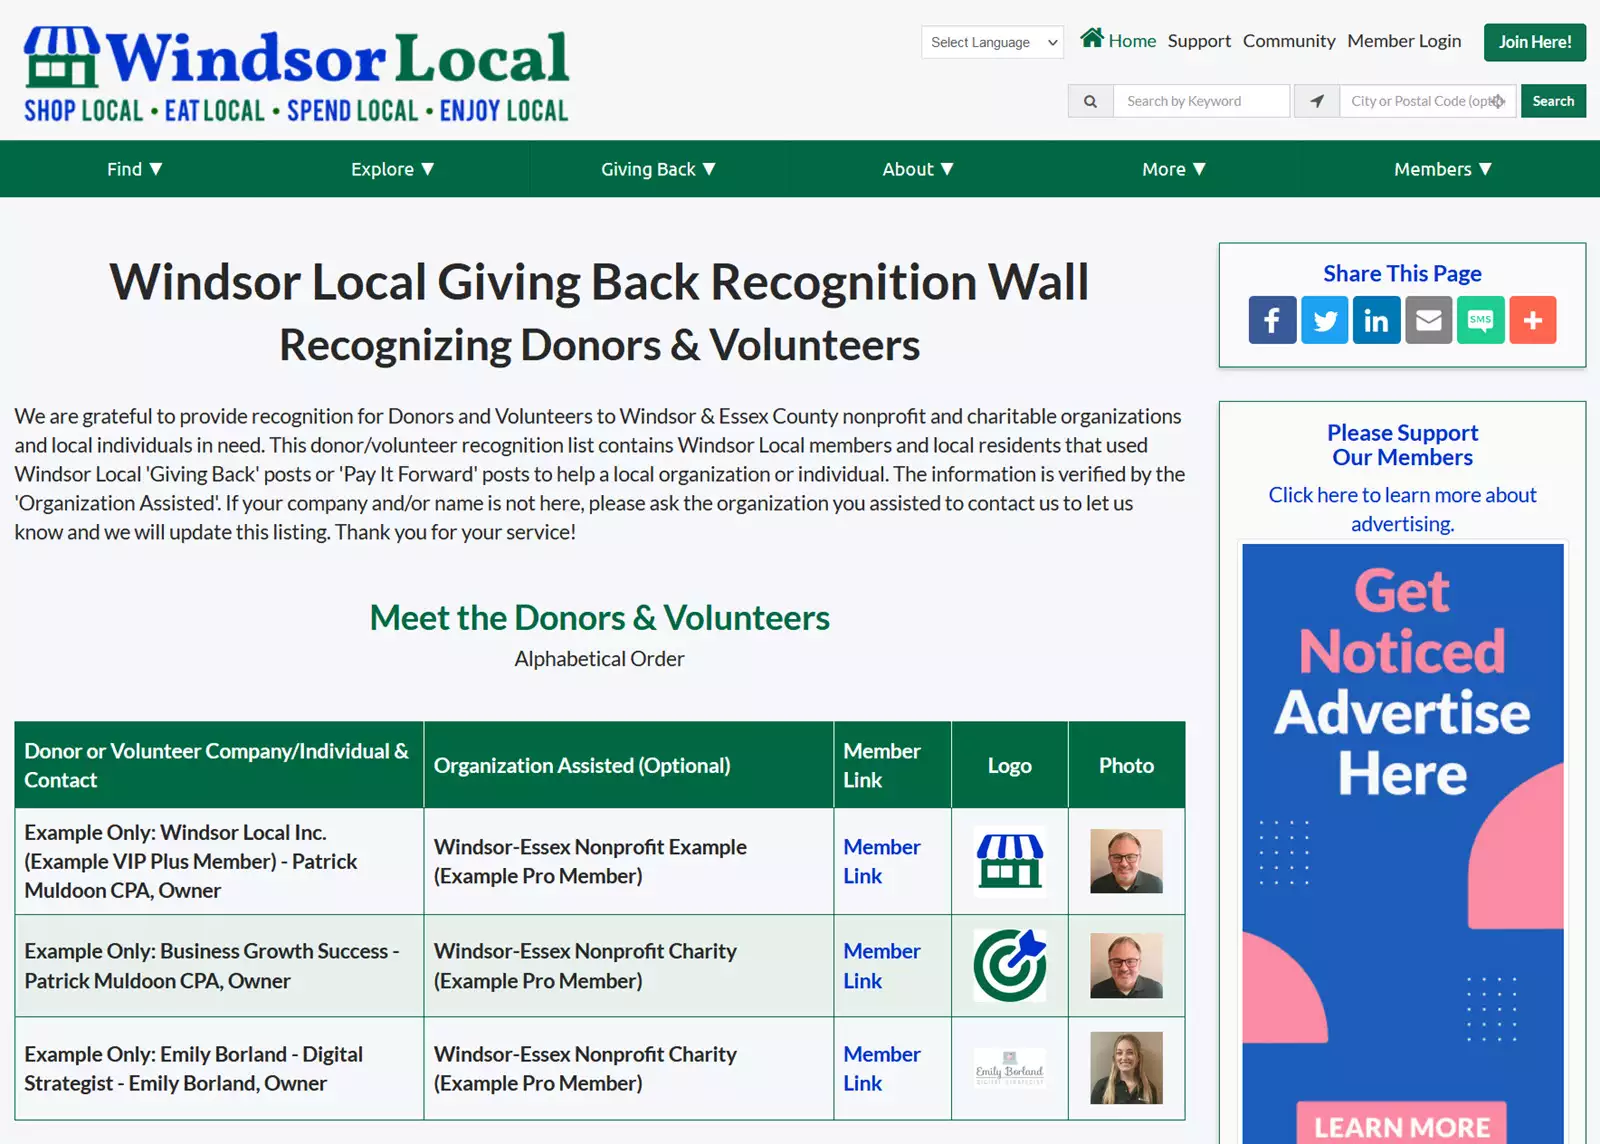 Windsor Local Giving Back - Recognition Wall view